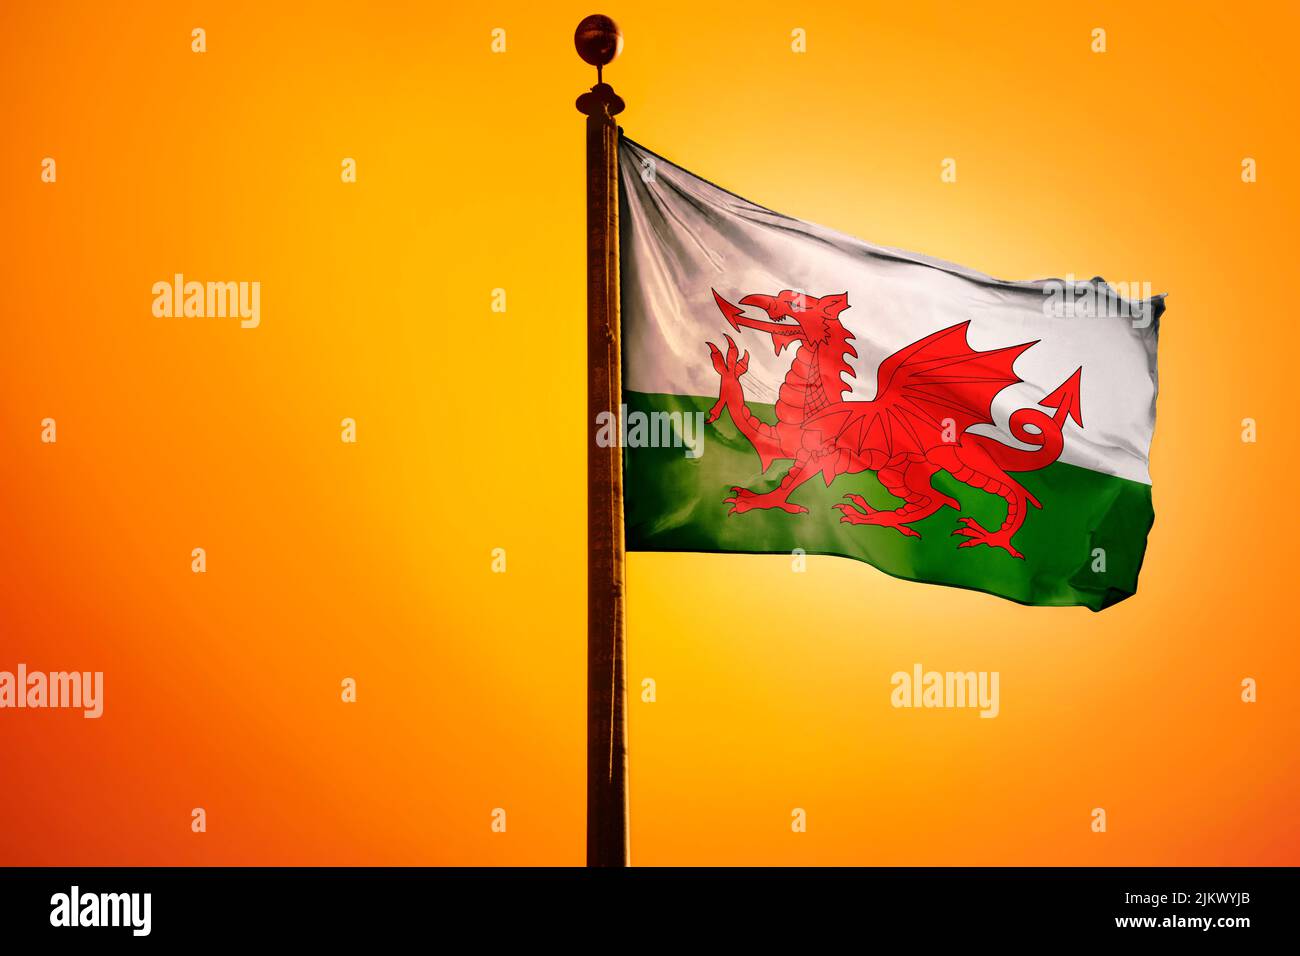 The waving flag of Wales on a bright yellow background Stock Photo